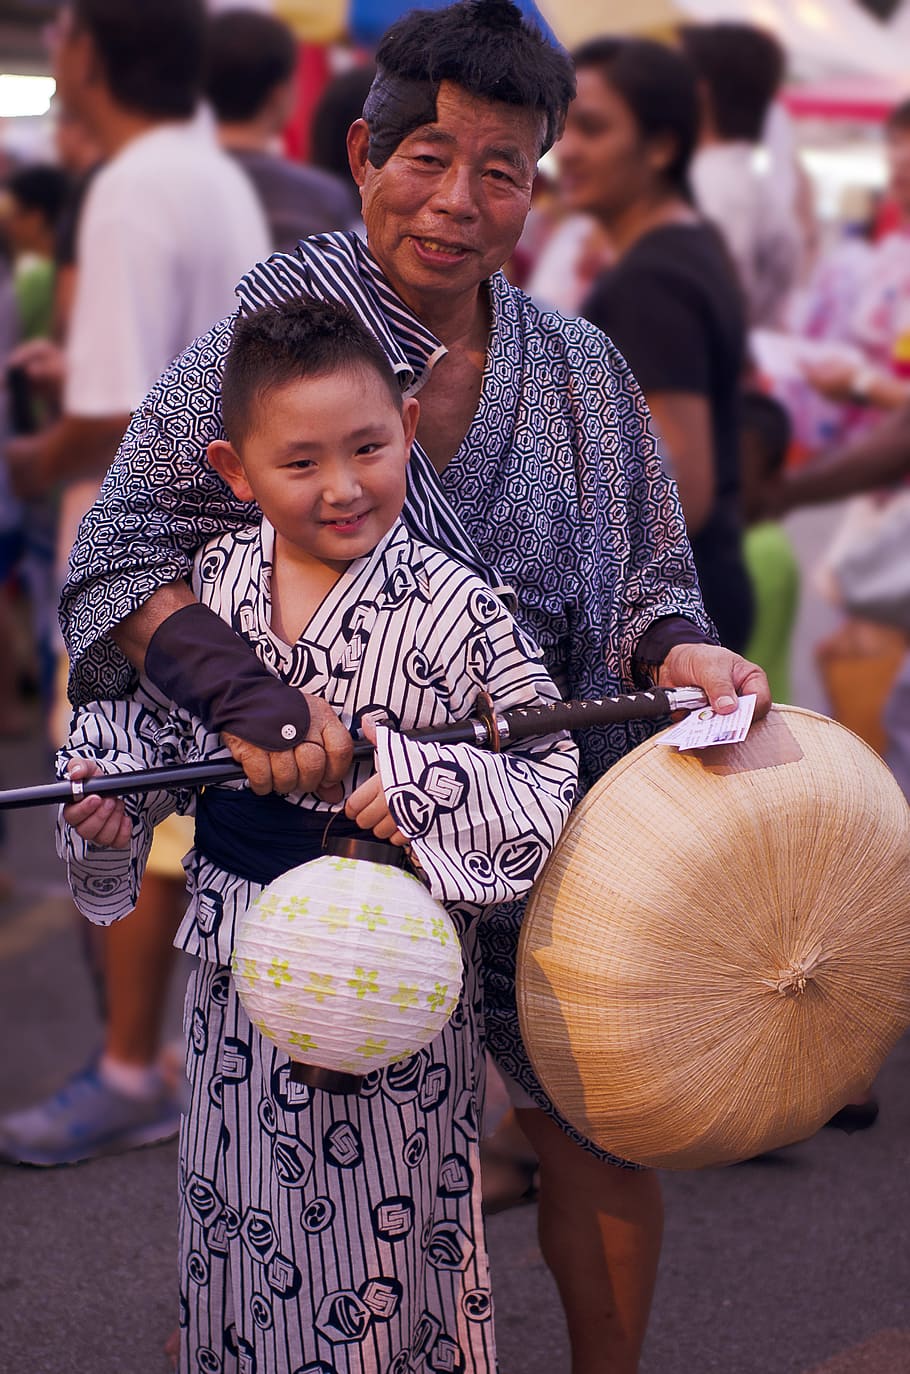 man holding hat and sword standing with boy during daytime, bon odori, HD wallpaper